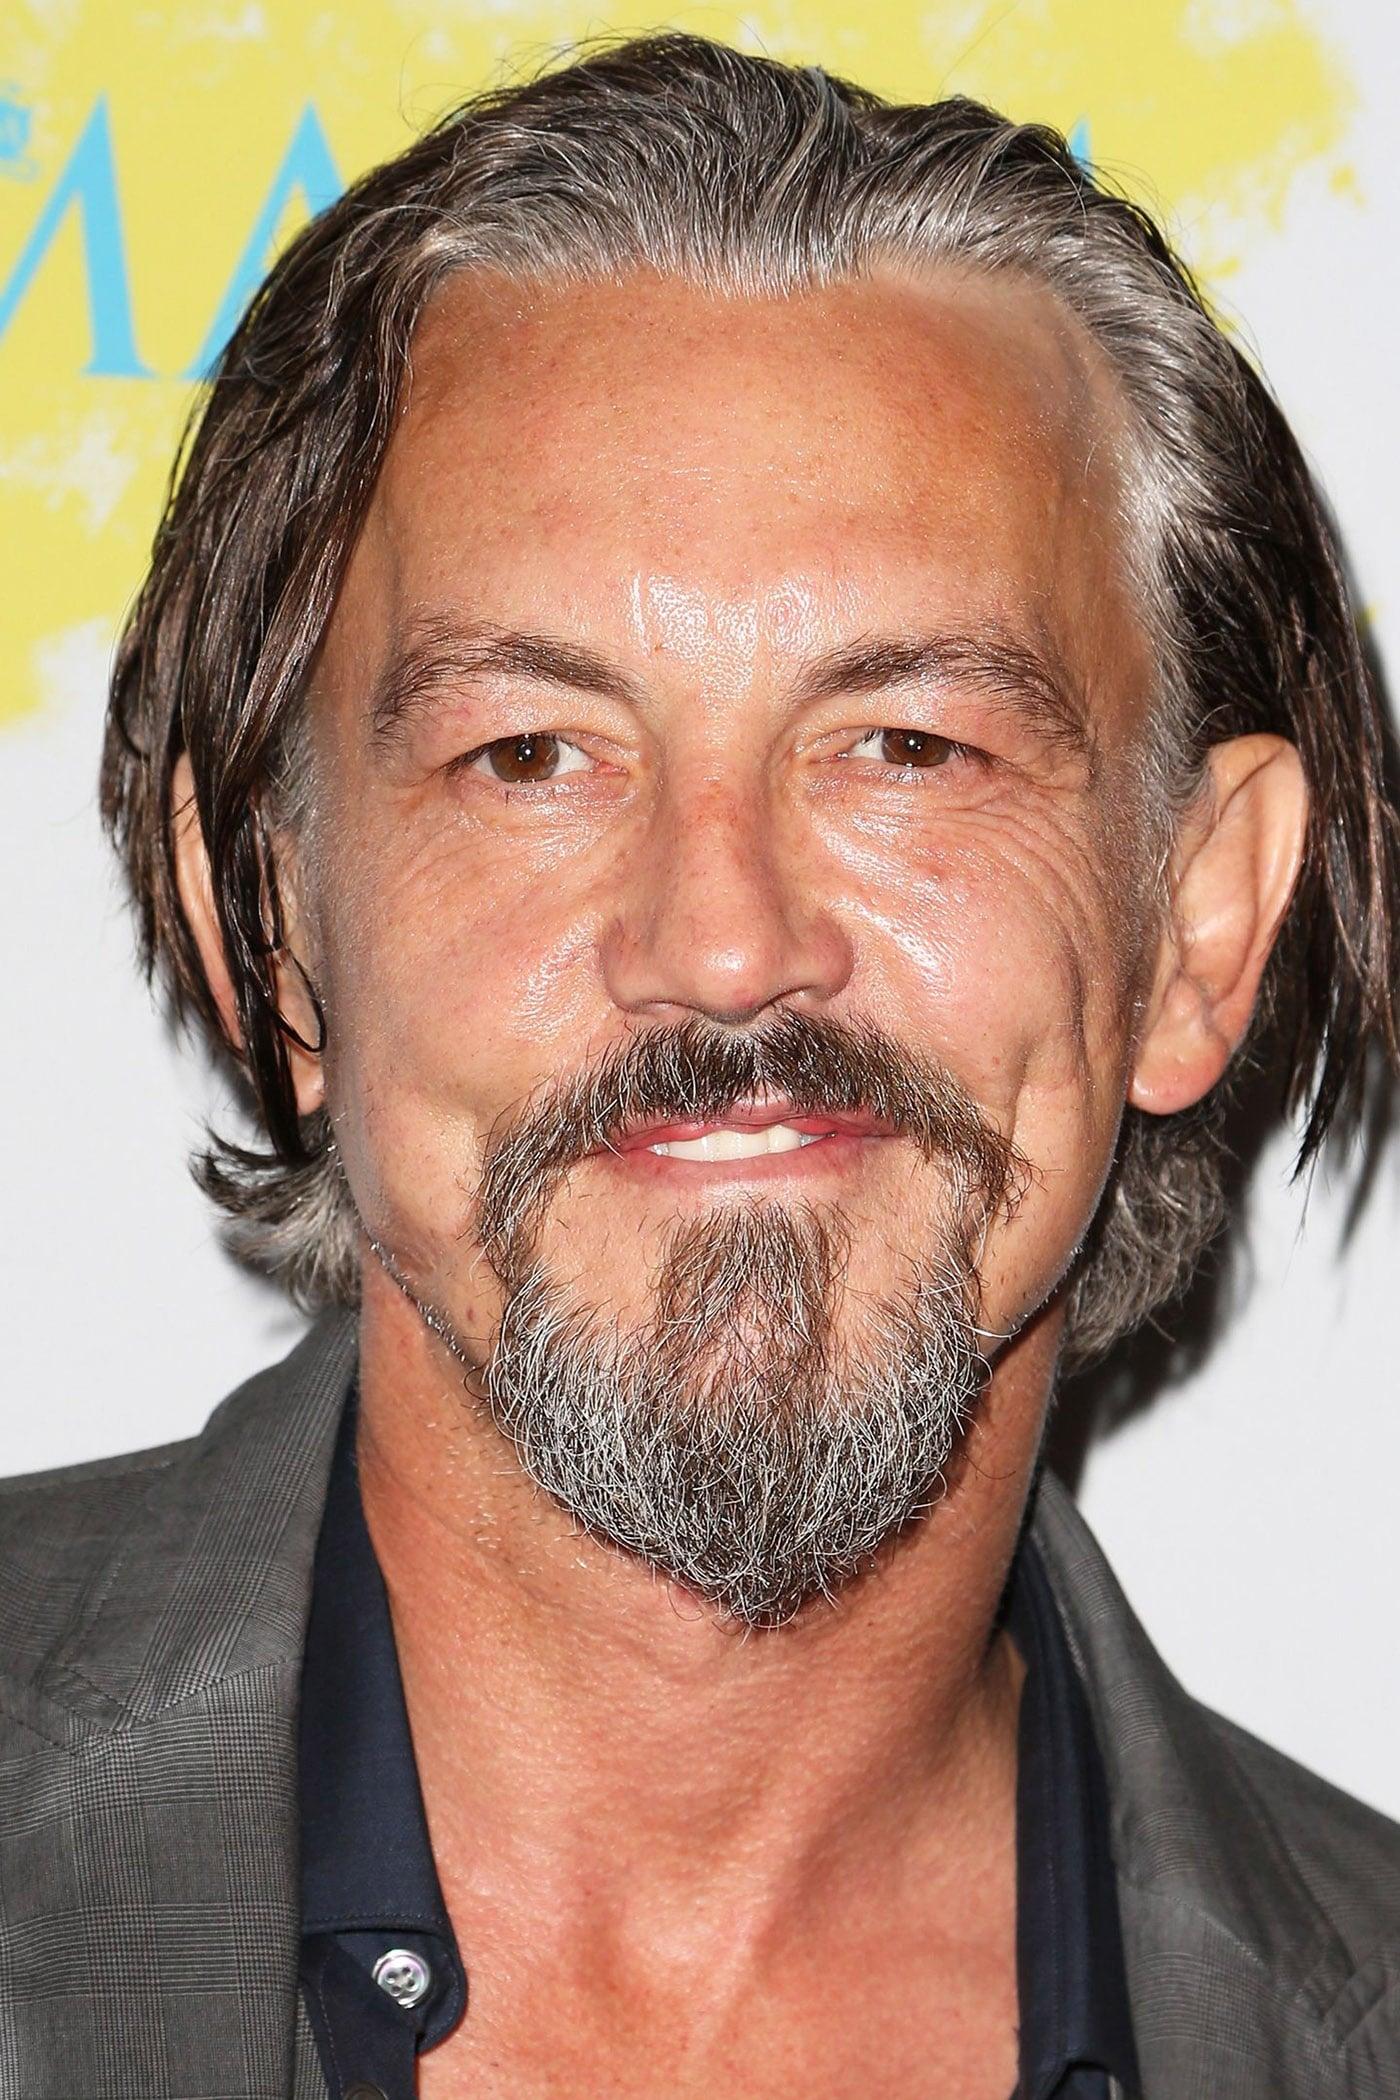 Tommy Flanagan poster